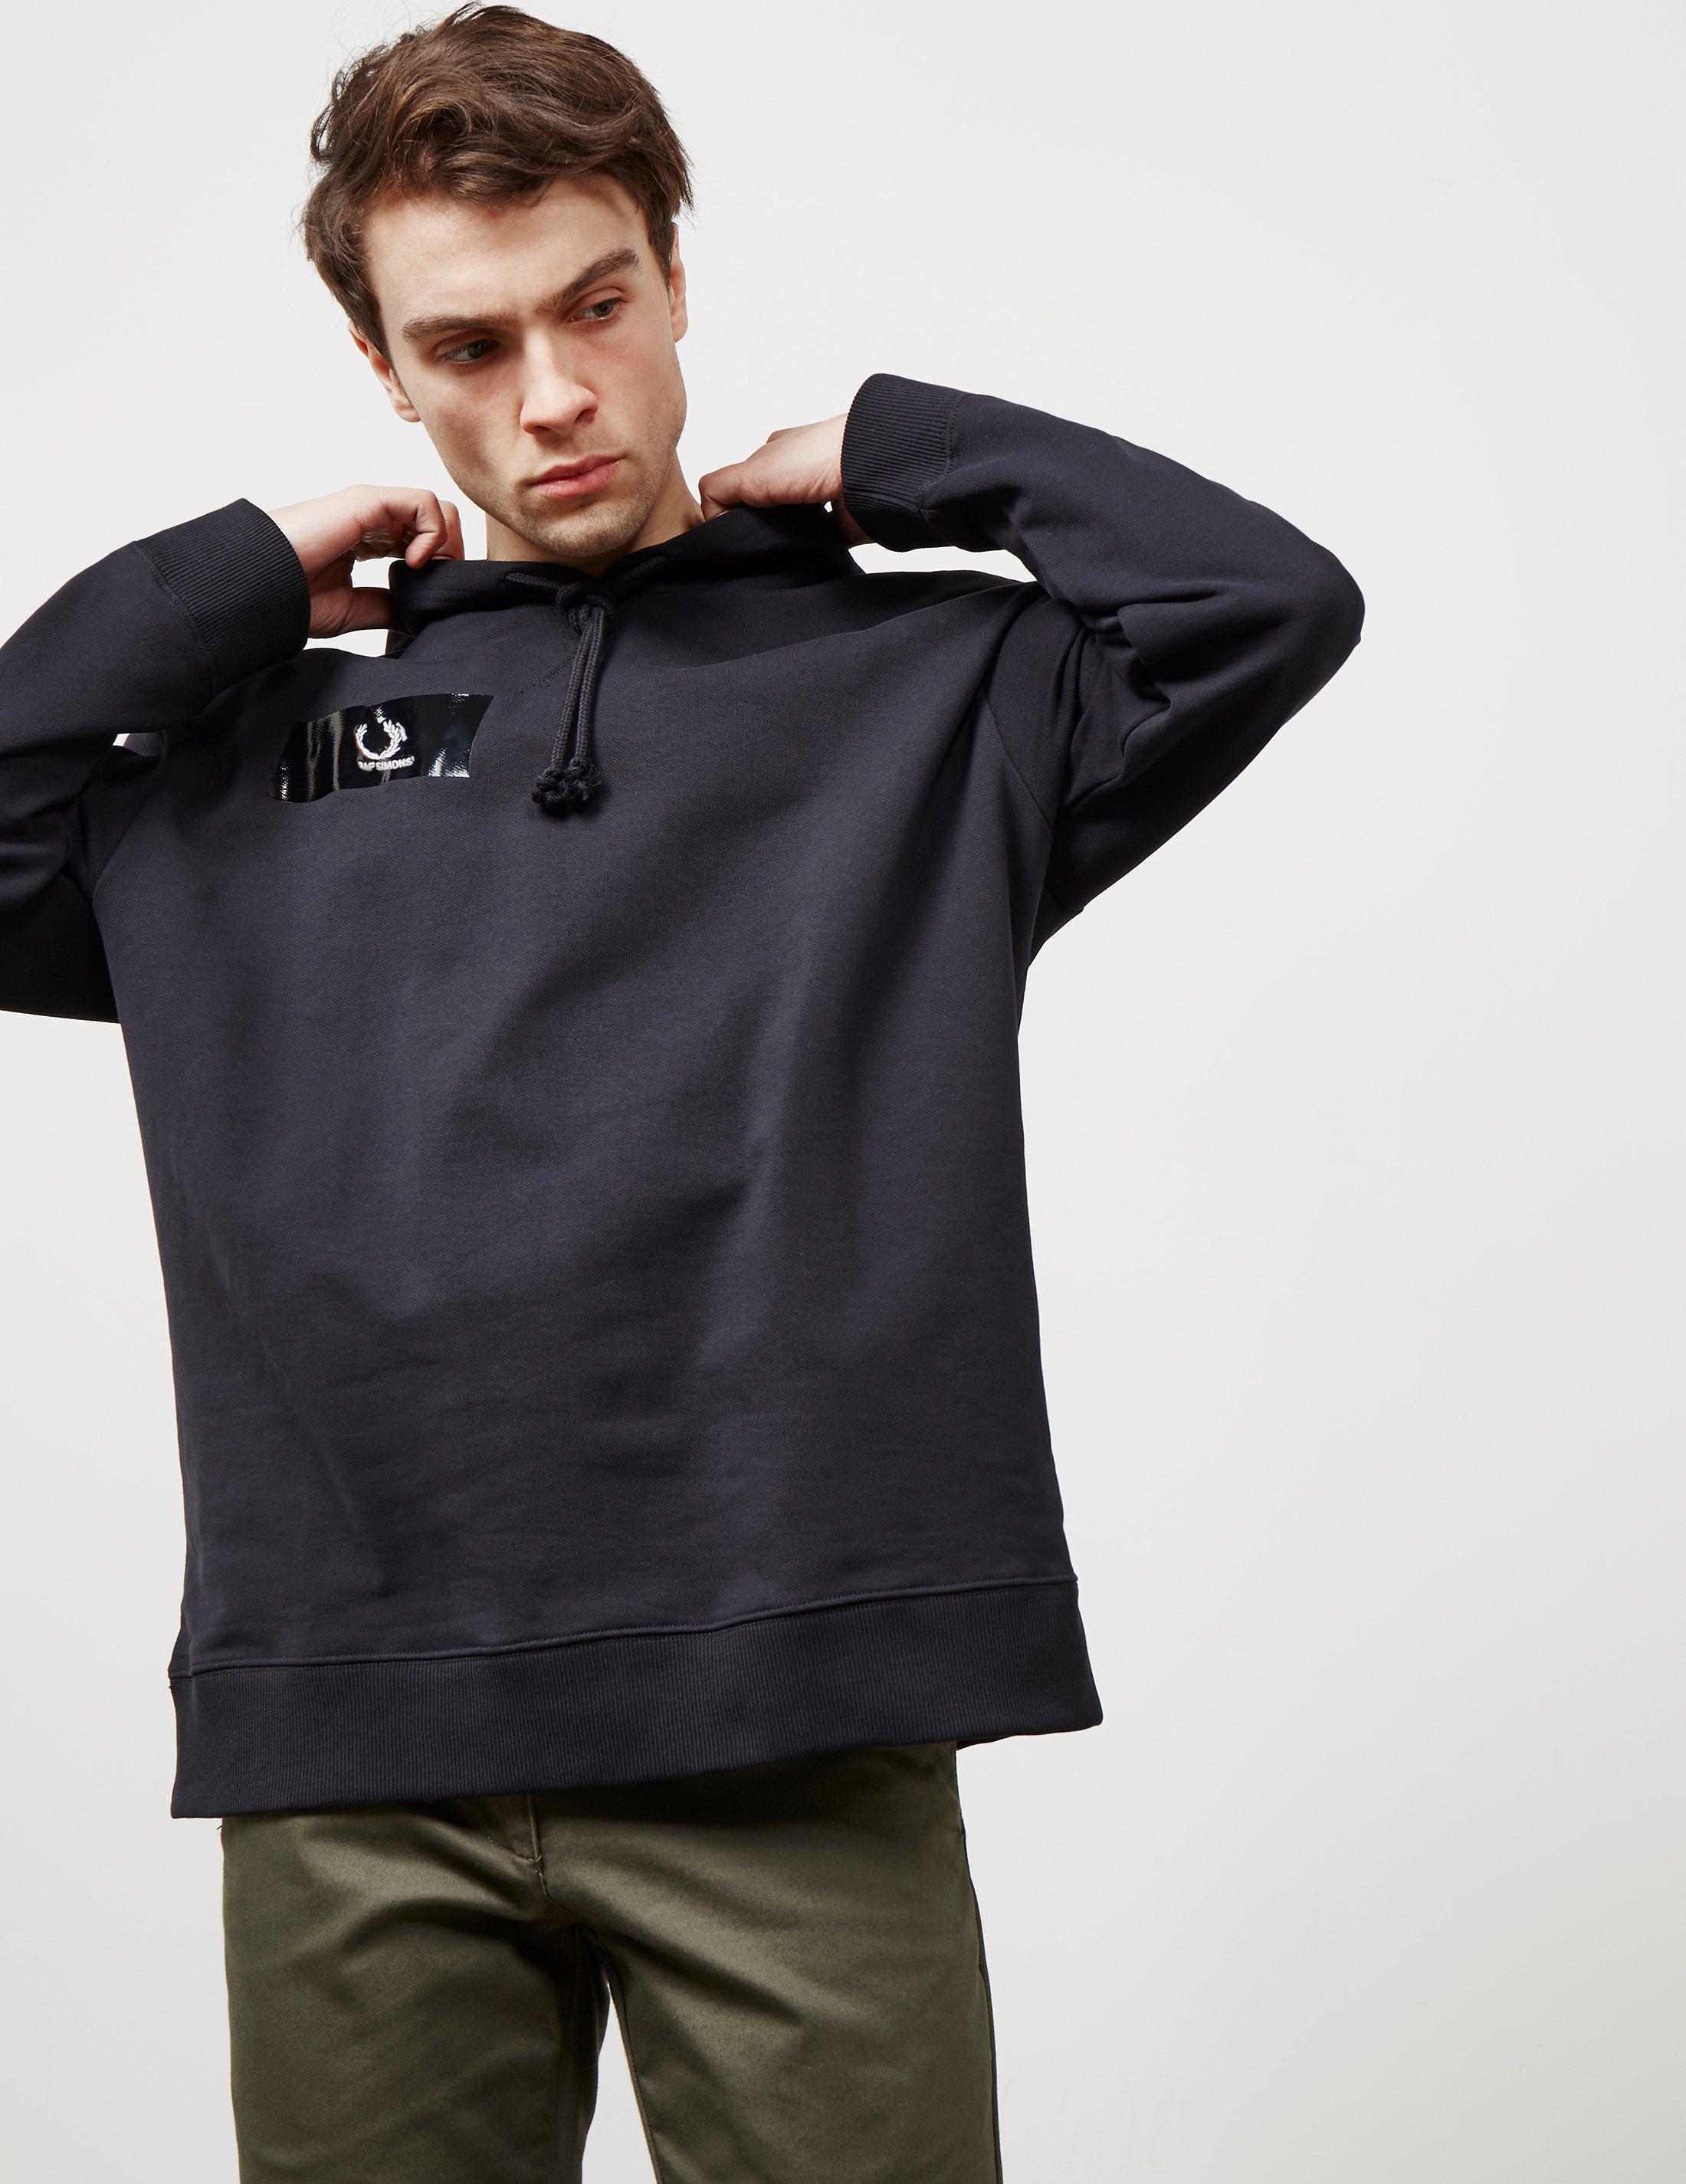 Fred Perry Raf Simons Hoodie Hotsell, GET 59% OFF,  www.thecommonwealthapts.com